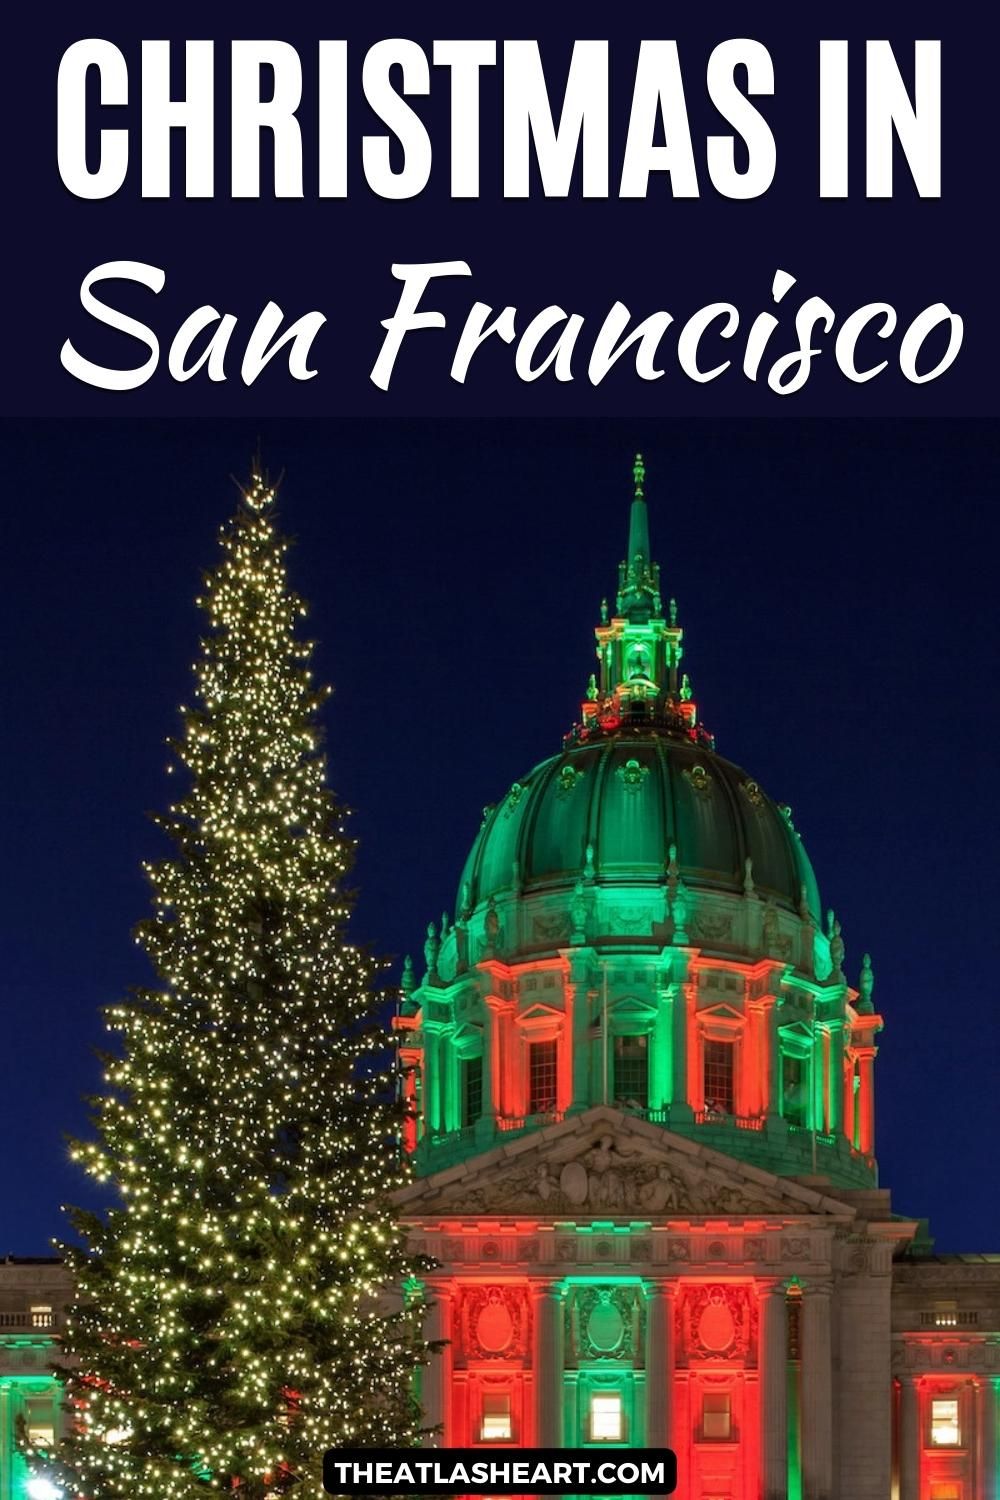 San Francisco City Hall seen at night illuminated by red and green lights, with a large Christmas tree in the foreground, with the text overlay, "Christmas in San Francisco."